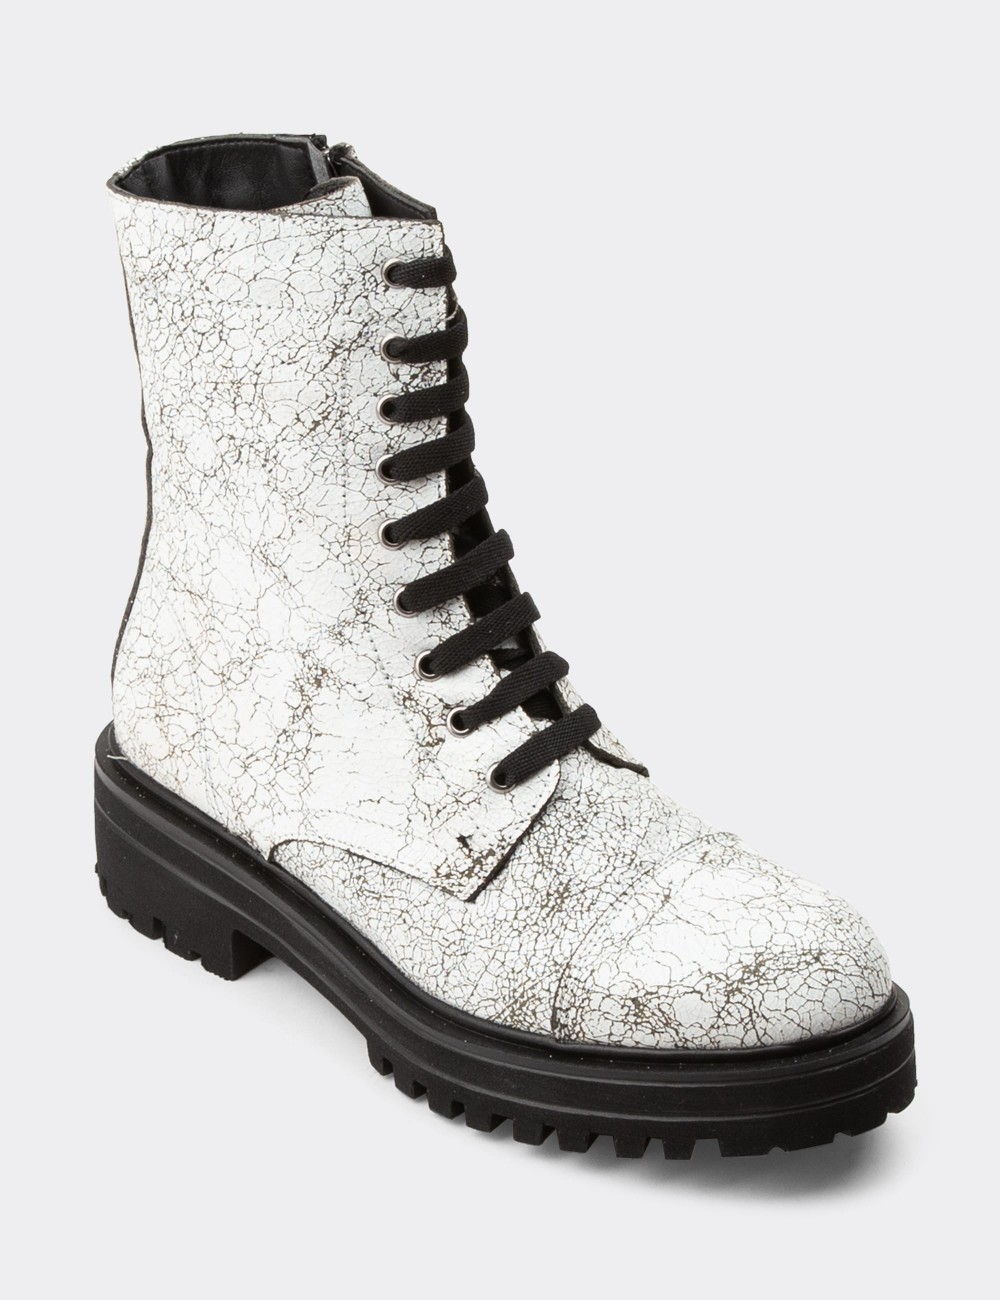 White Leather Vintage Boots - 01802ZBYZE01